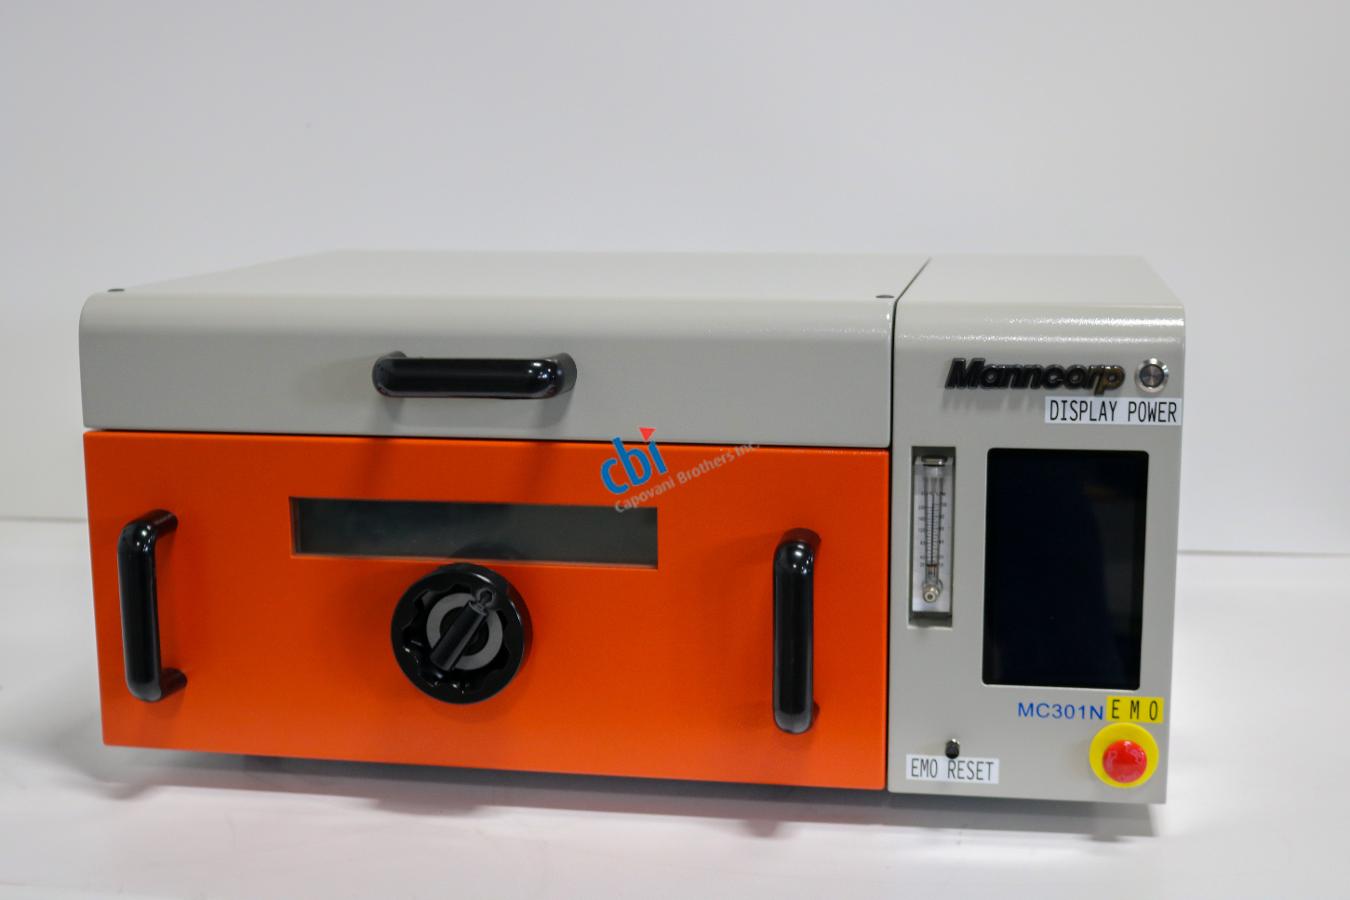 MANNCORP BENCH TOP SOLDER REFLOW OVEN 